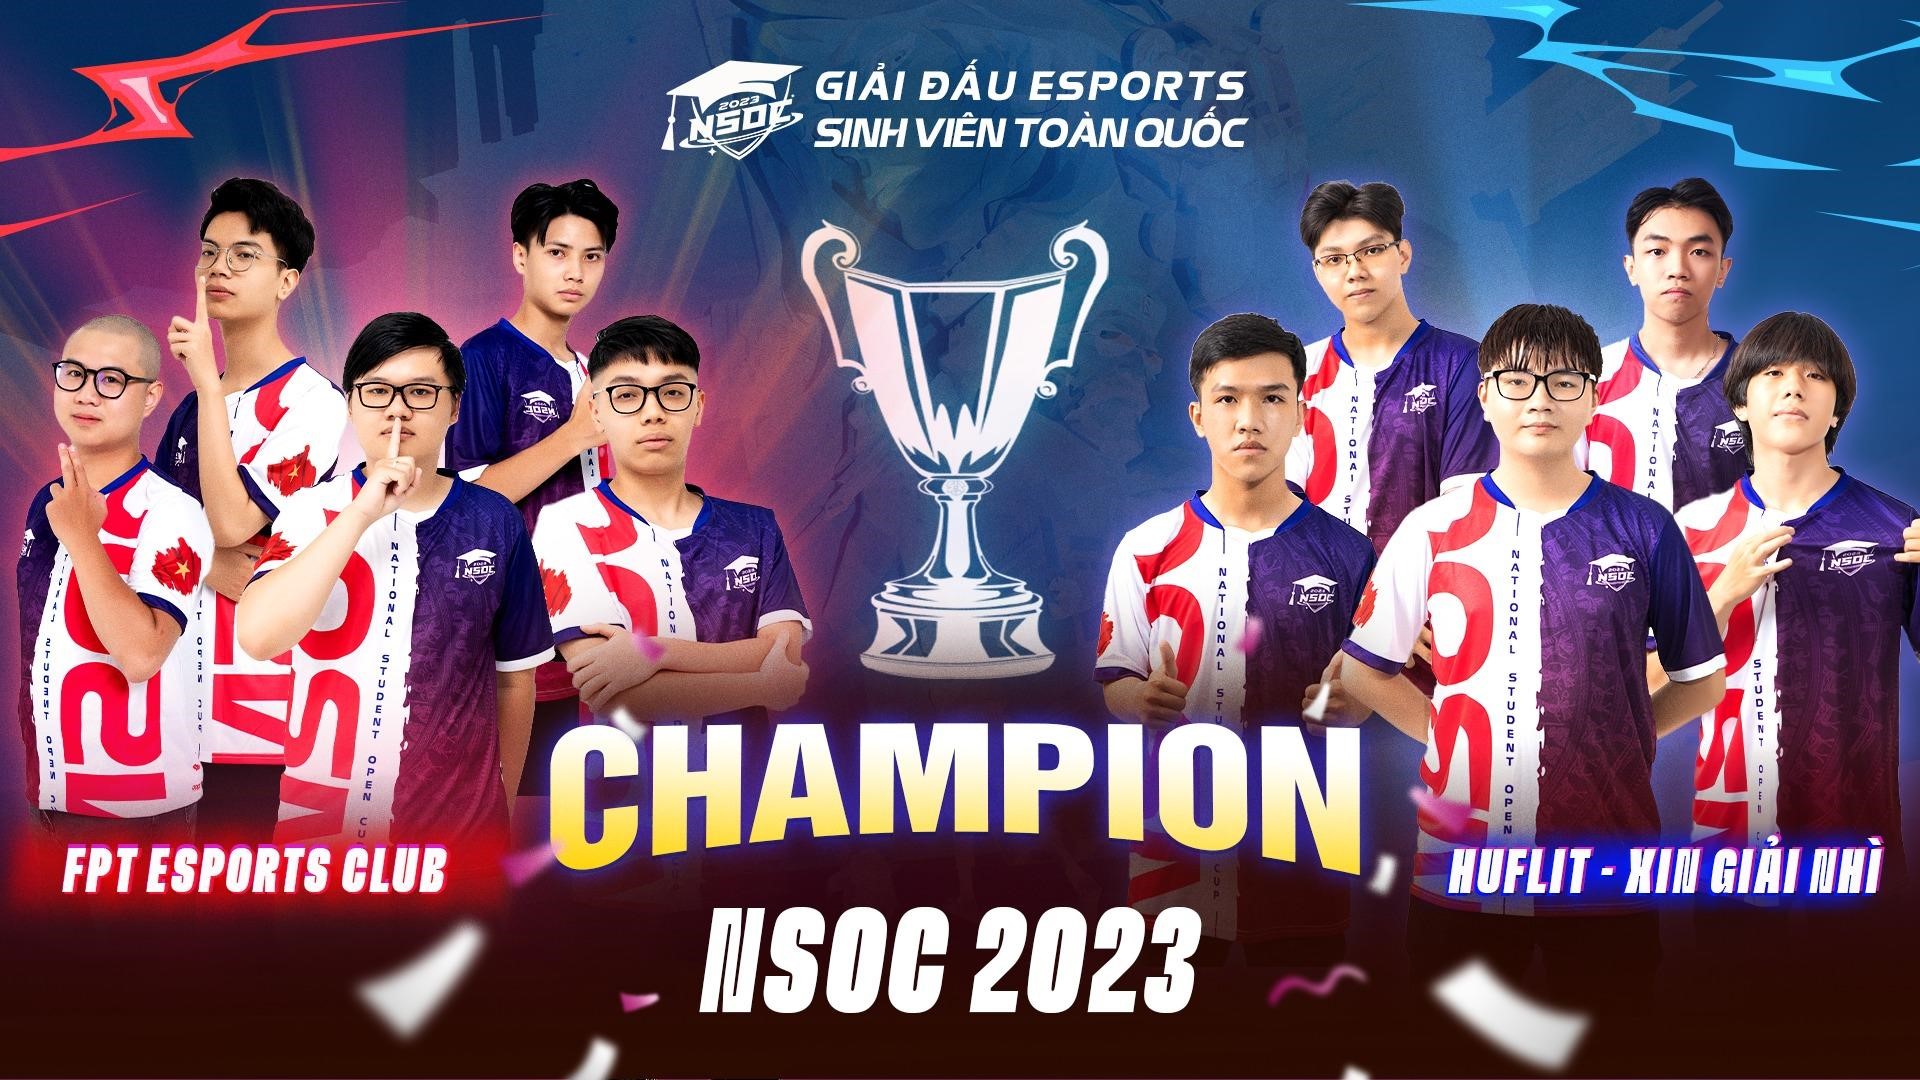 NSOC 2023 National Finals explode at the most modern Esports arena in Vietnam - Photo 16.